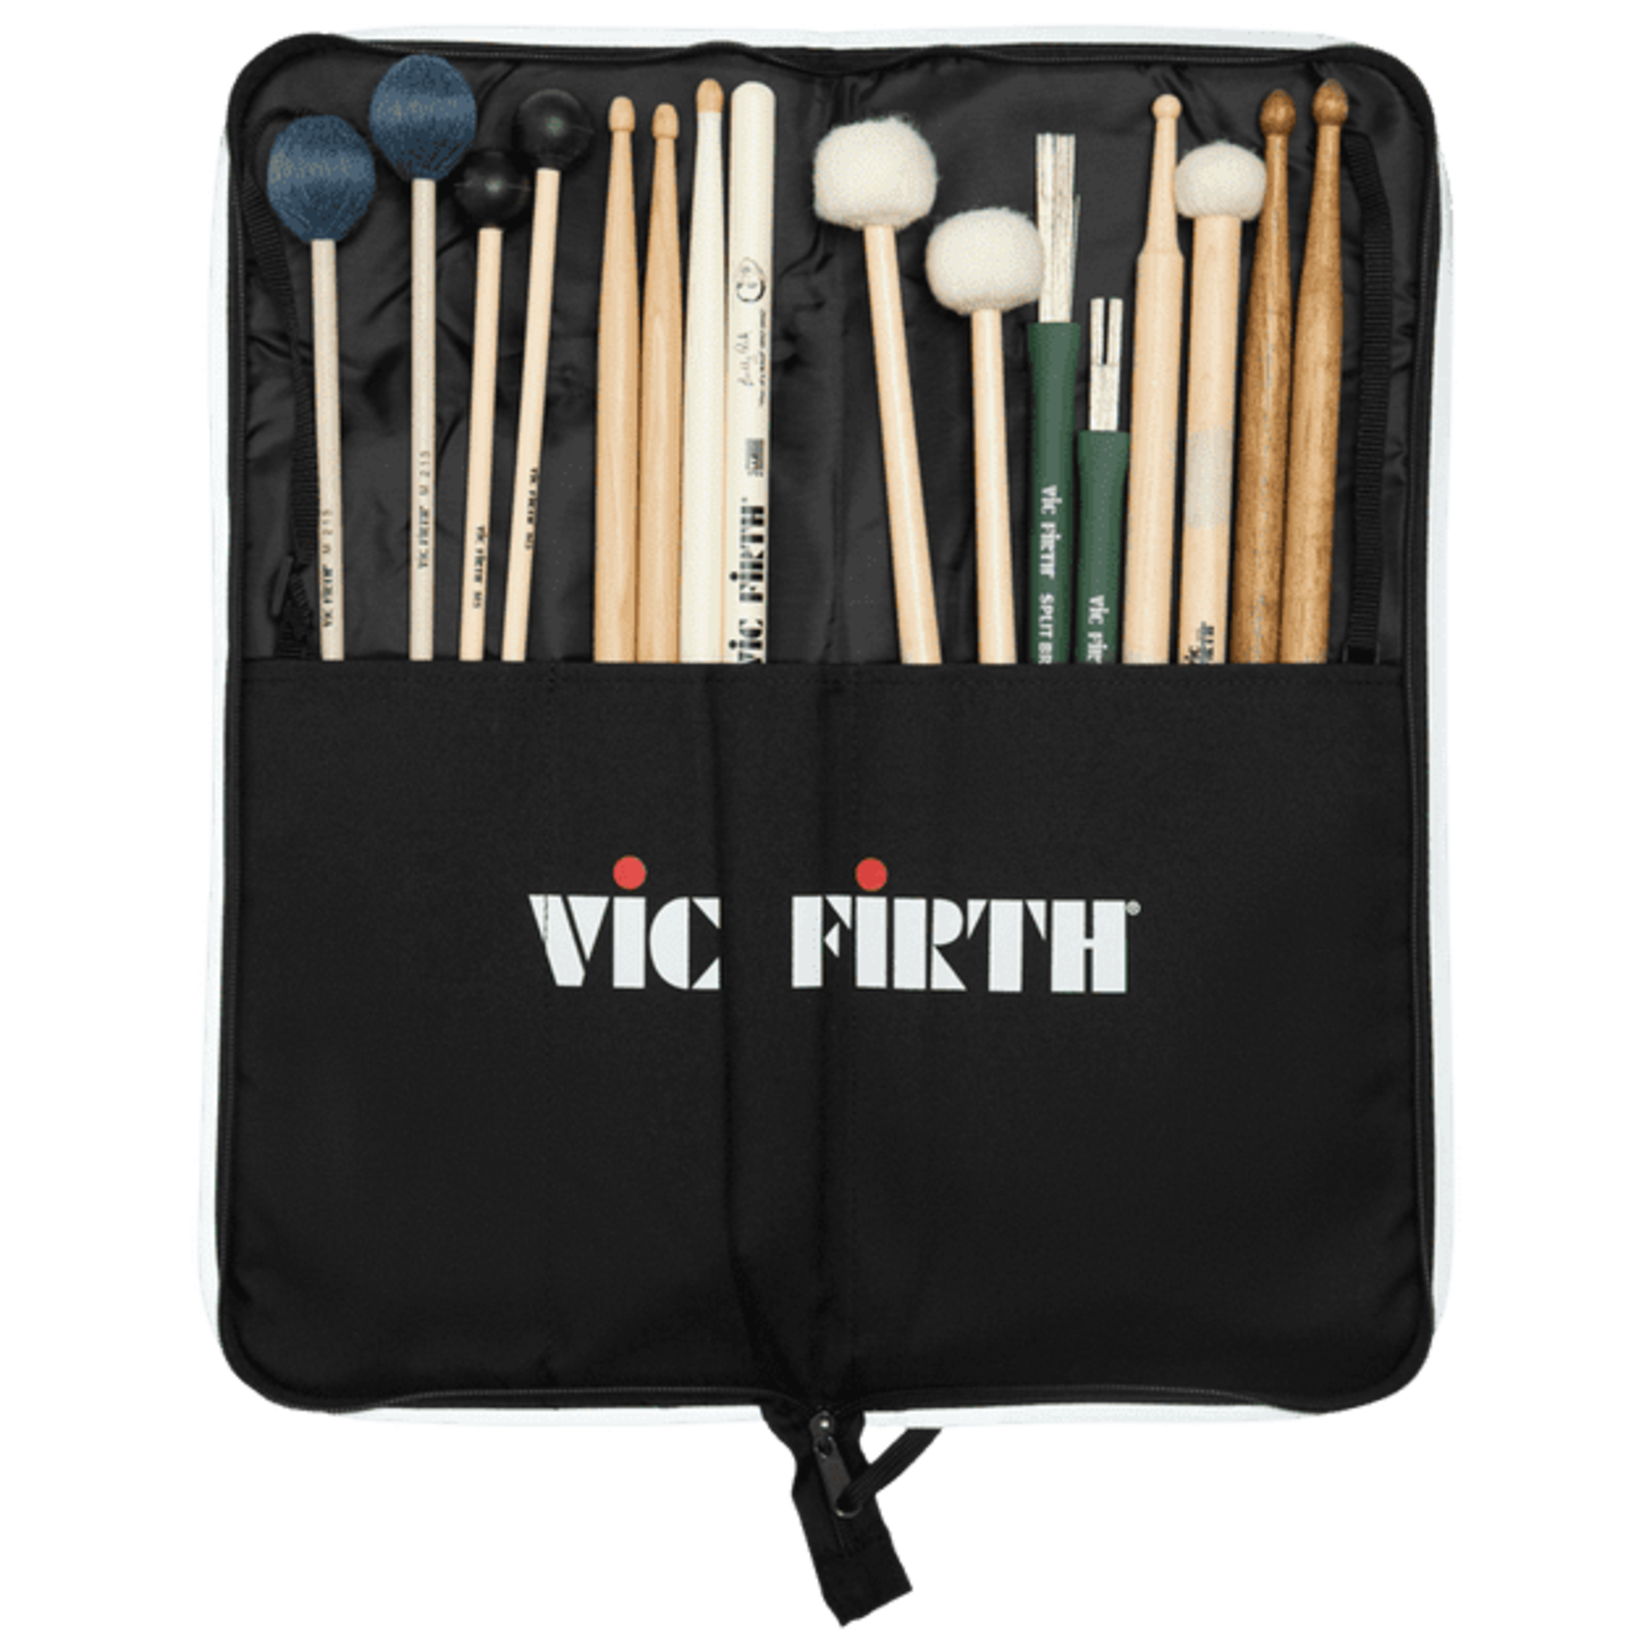 Vic Firth Vic Firth "Vicpack" Backpack